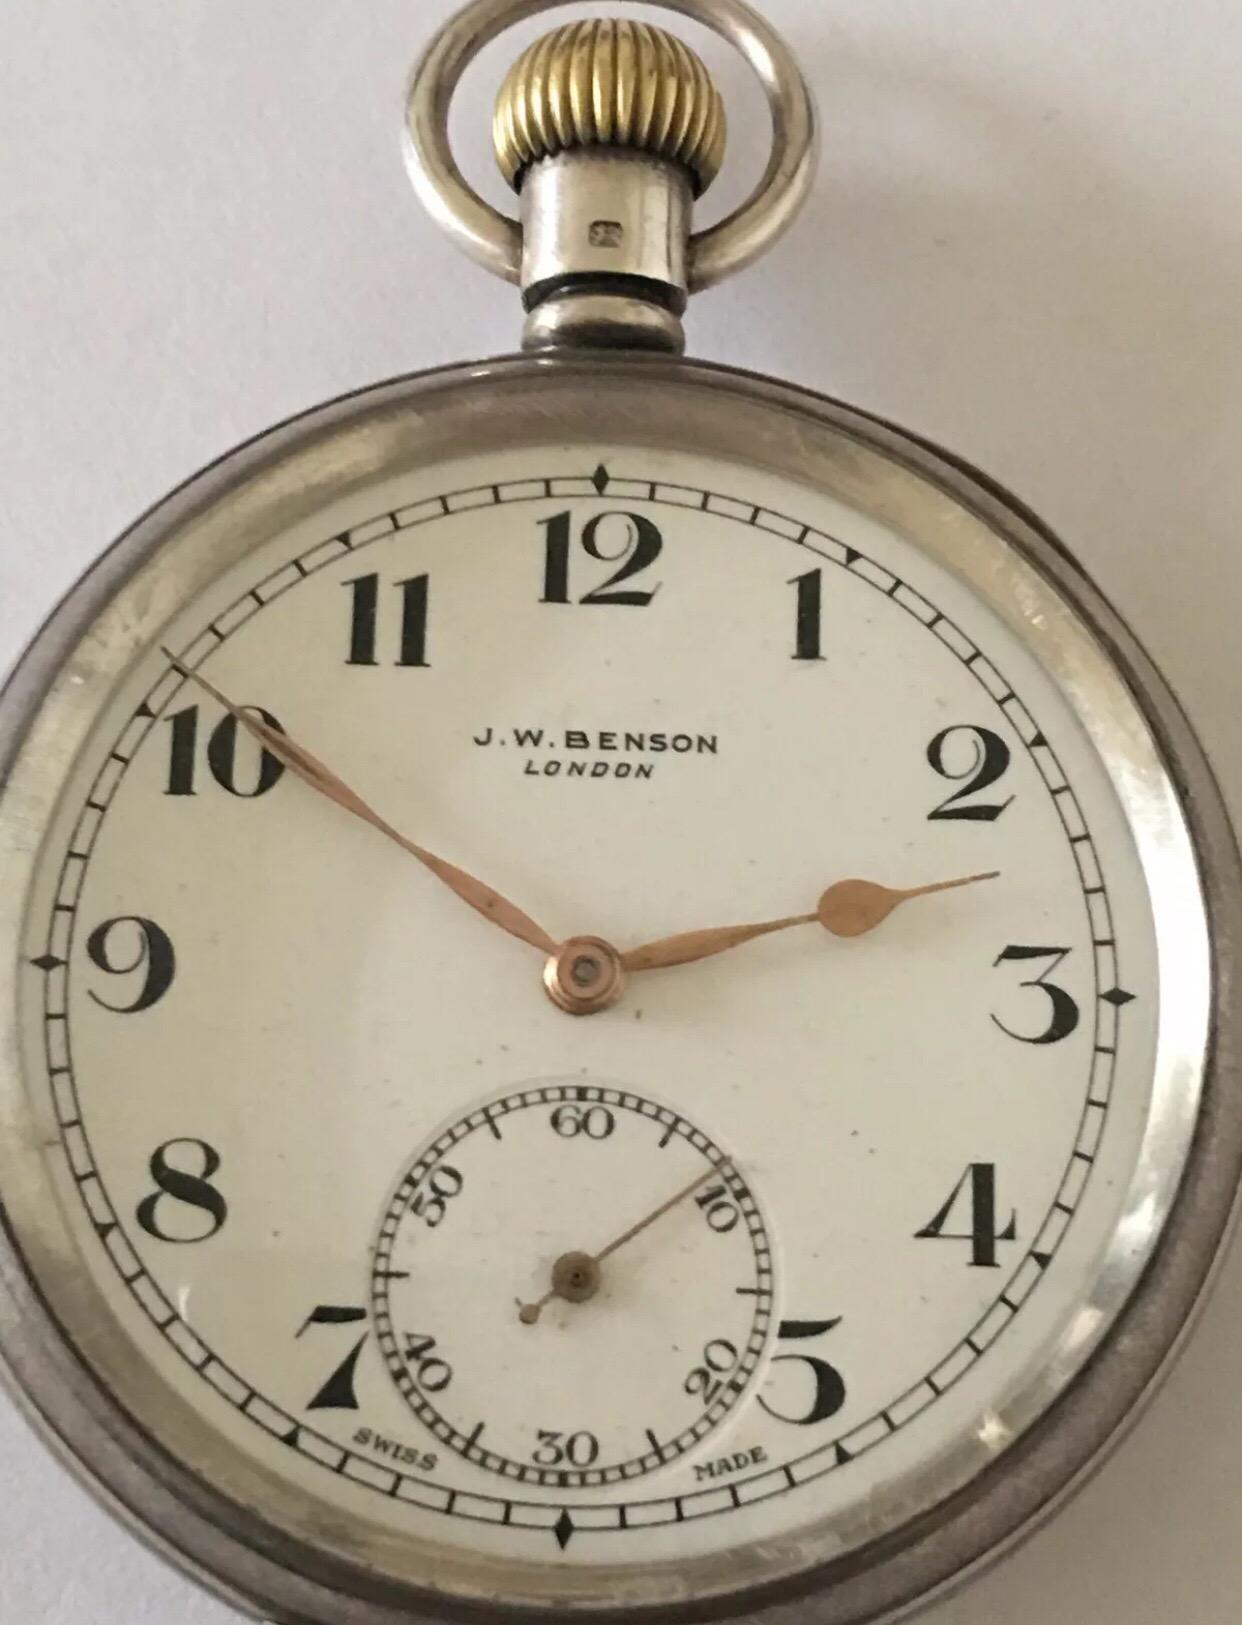 Antique J.W. Benson London Silver Pocket Watch.

This silver English pocket watch is working and ticking nicely. There is a visible dot dent on the back cover as shown on the photo. 
Please study the images carefully as form part of the description.